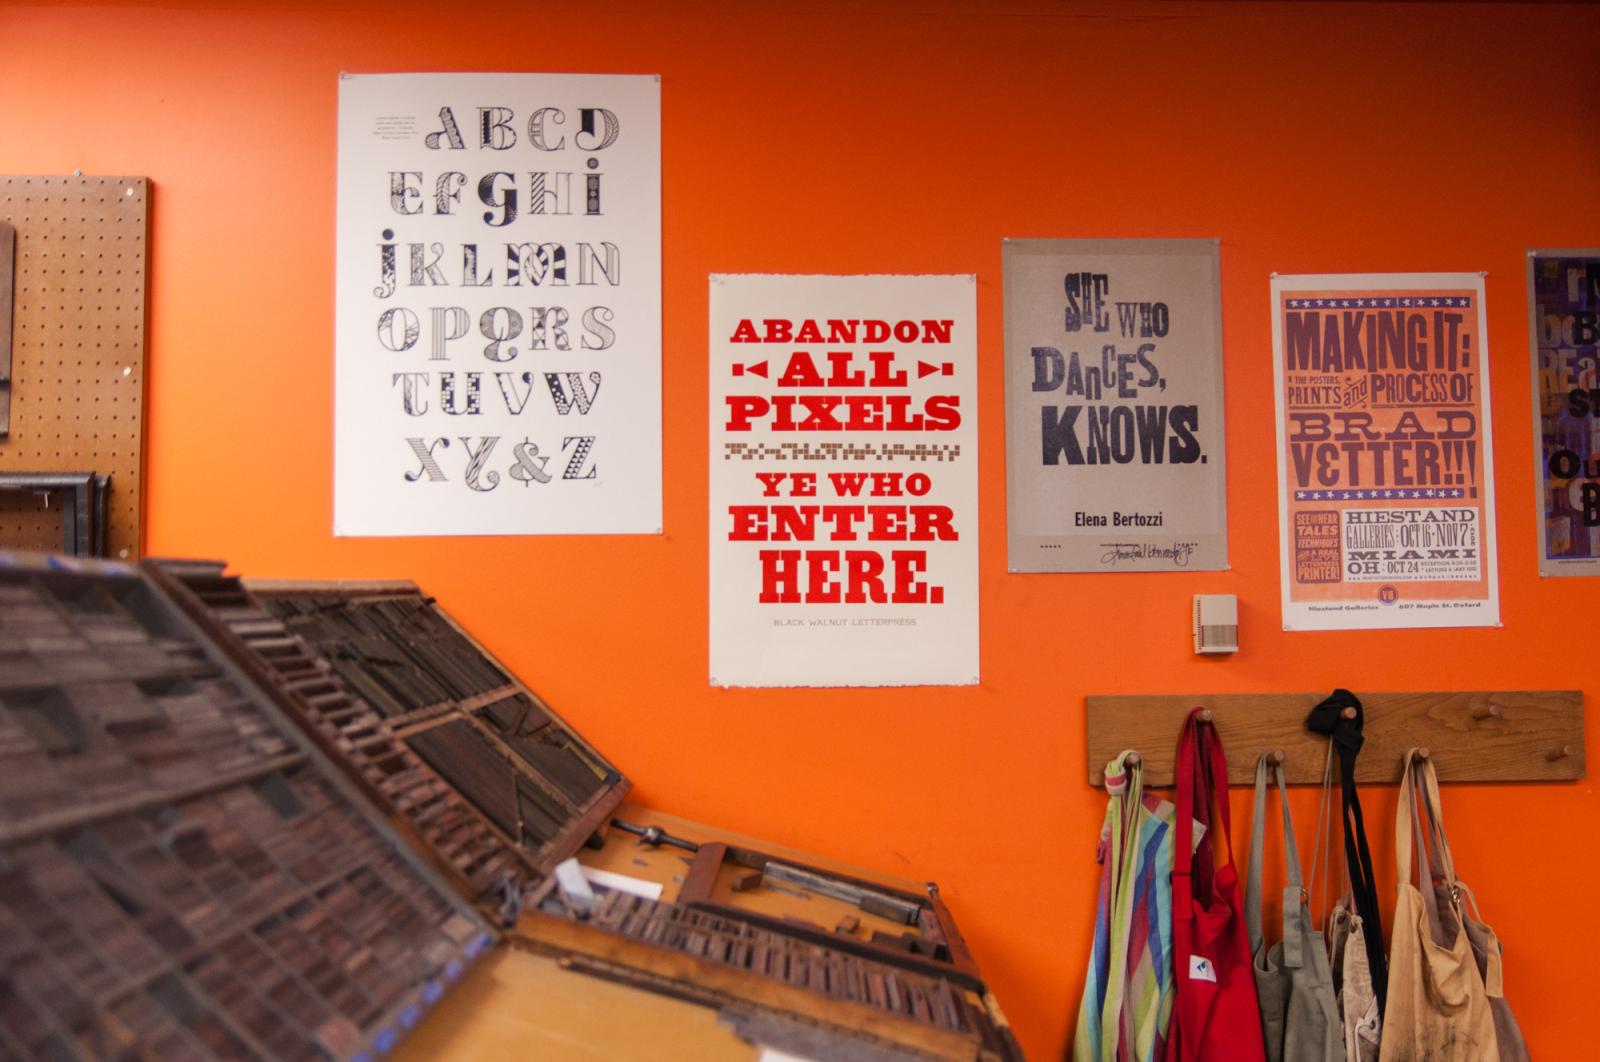 The wall next to some printing equipment features posters with a variety of bold and dramatic font faces.